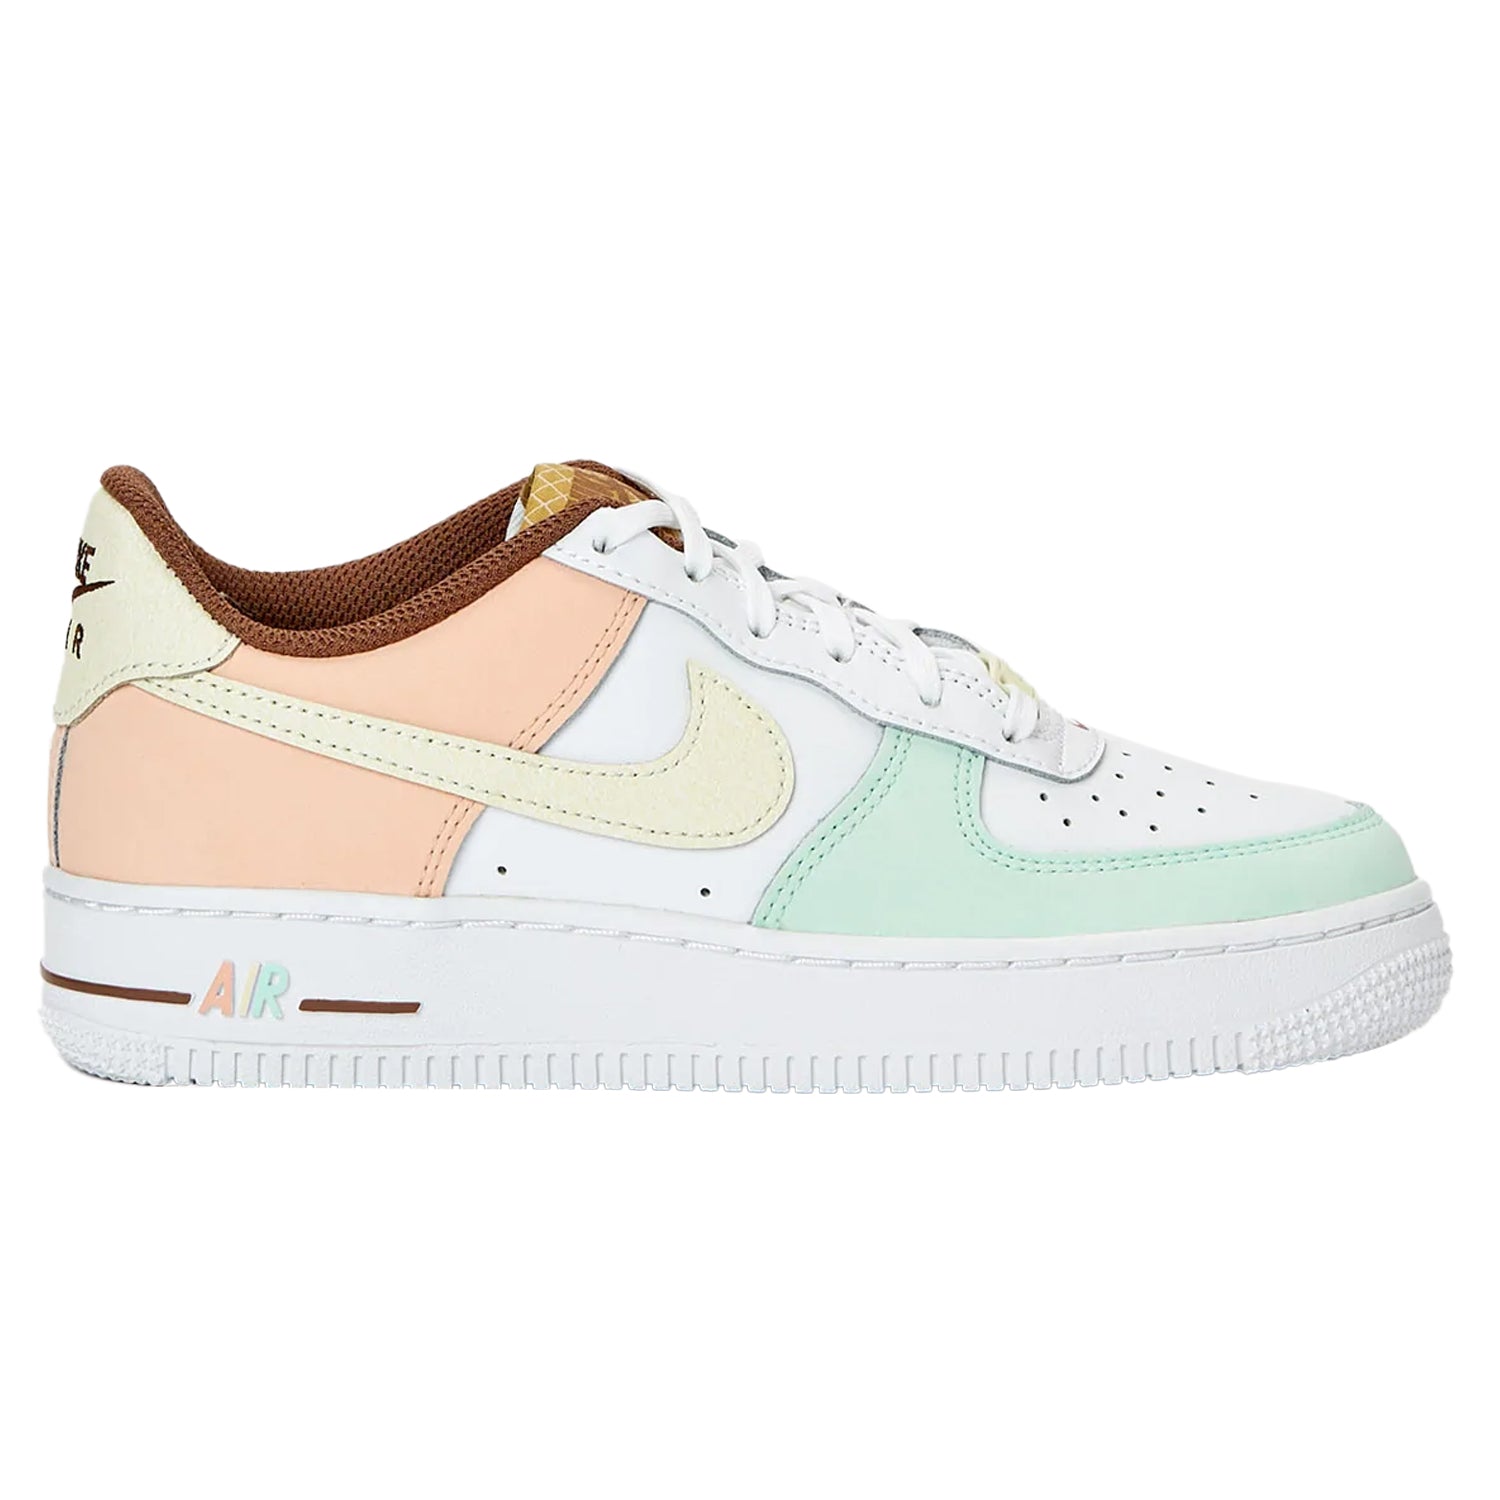 Nike Air Force 1 Low LV8 Ice Cream (GS)